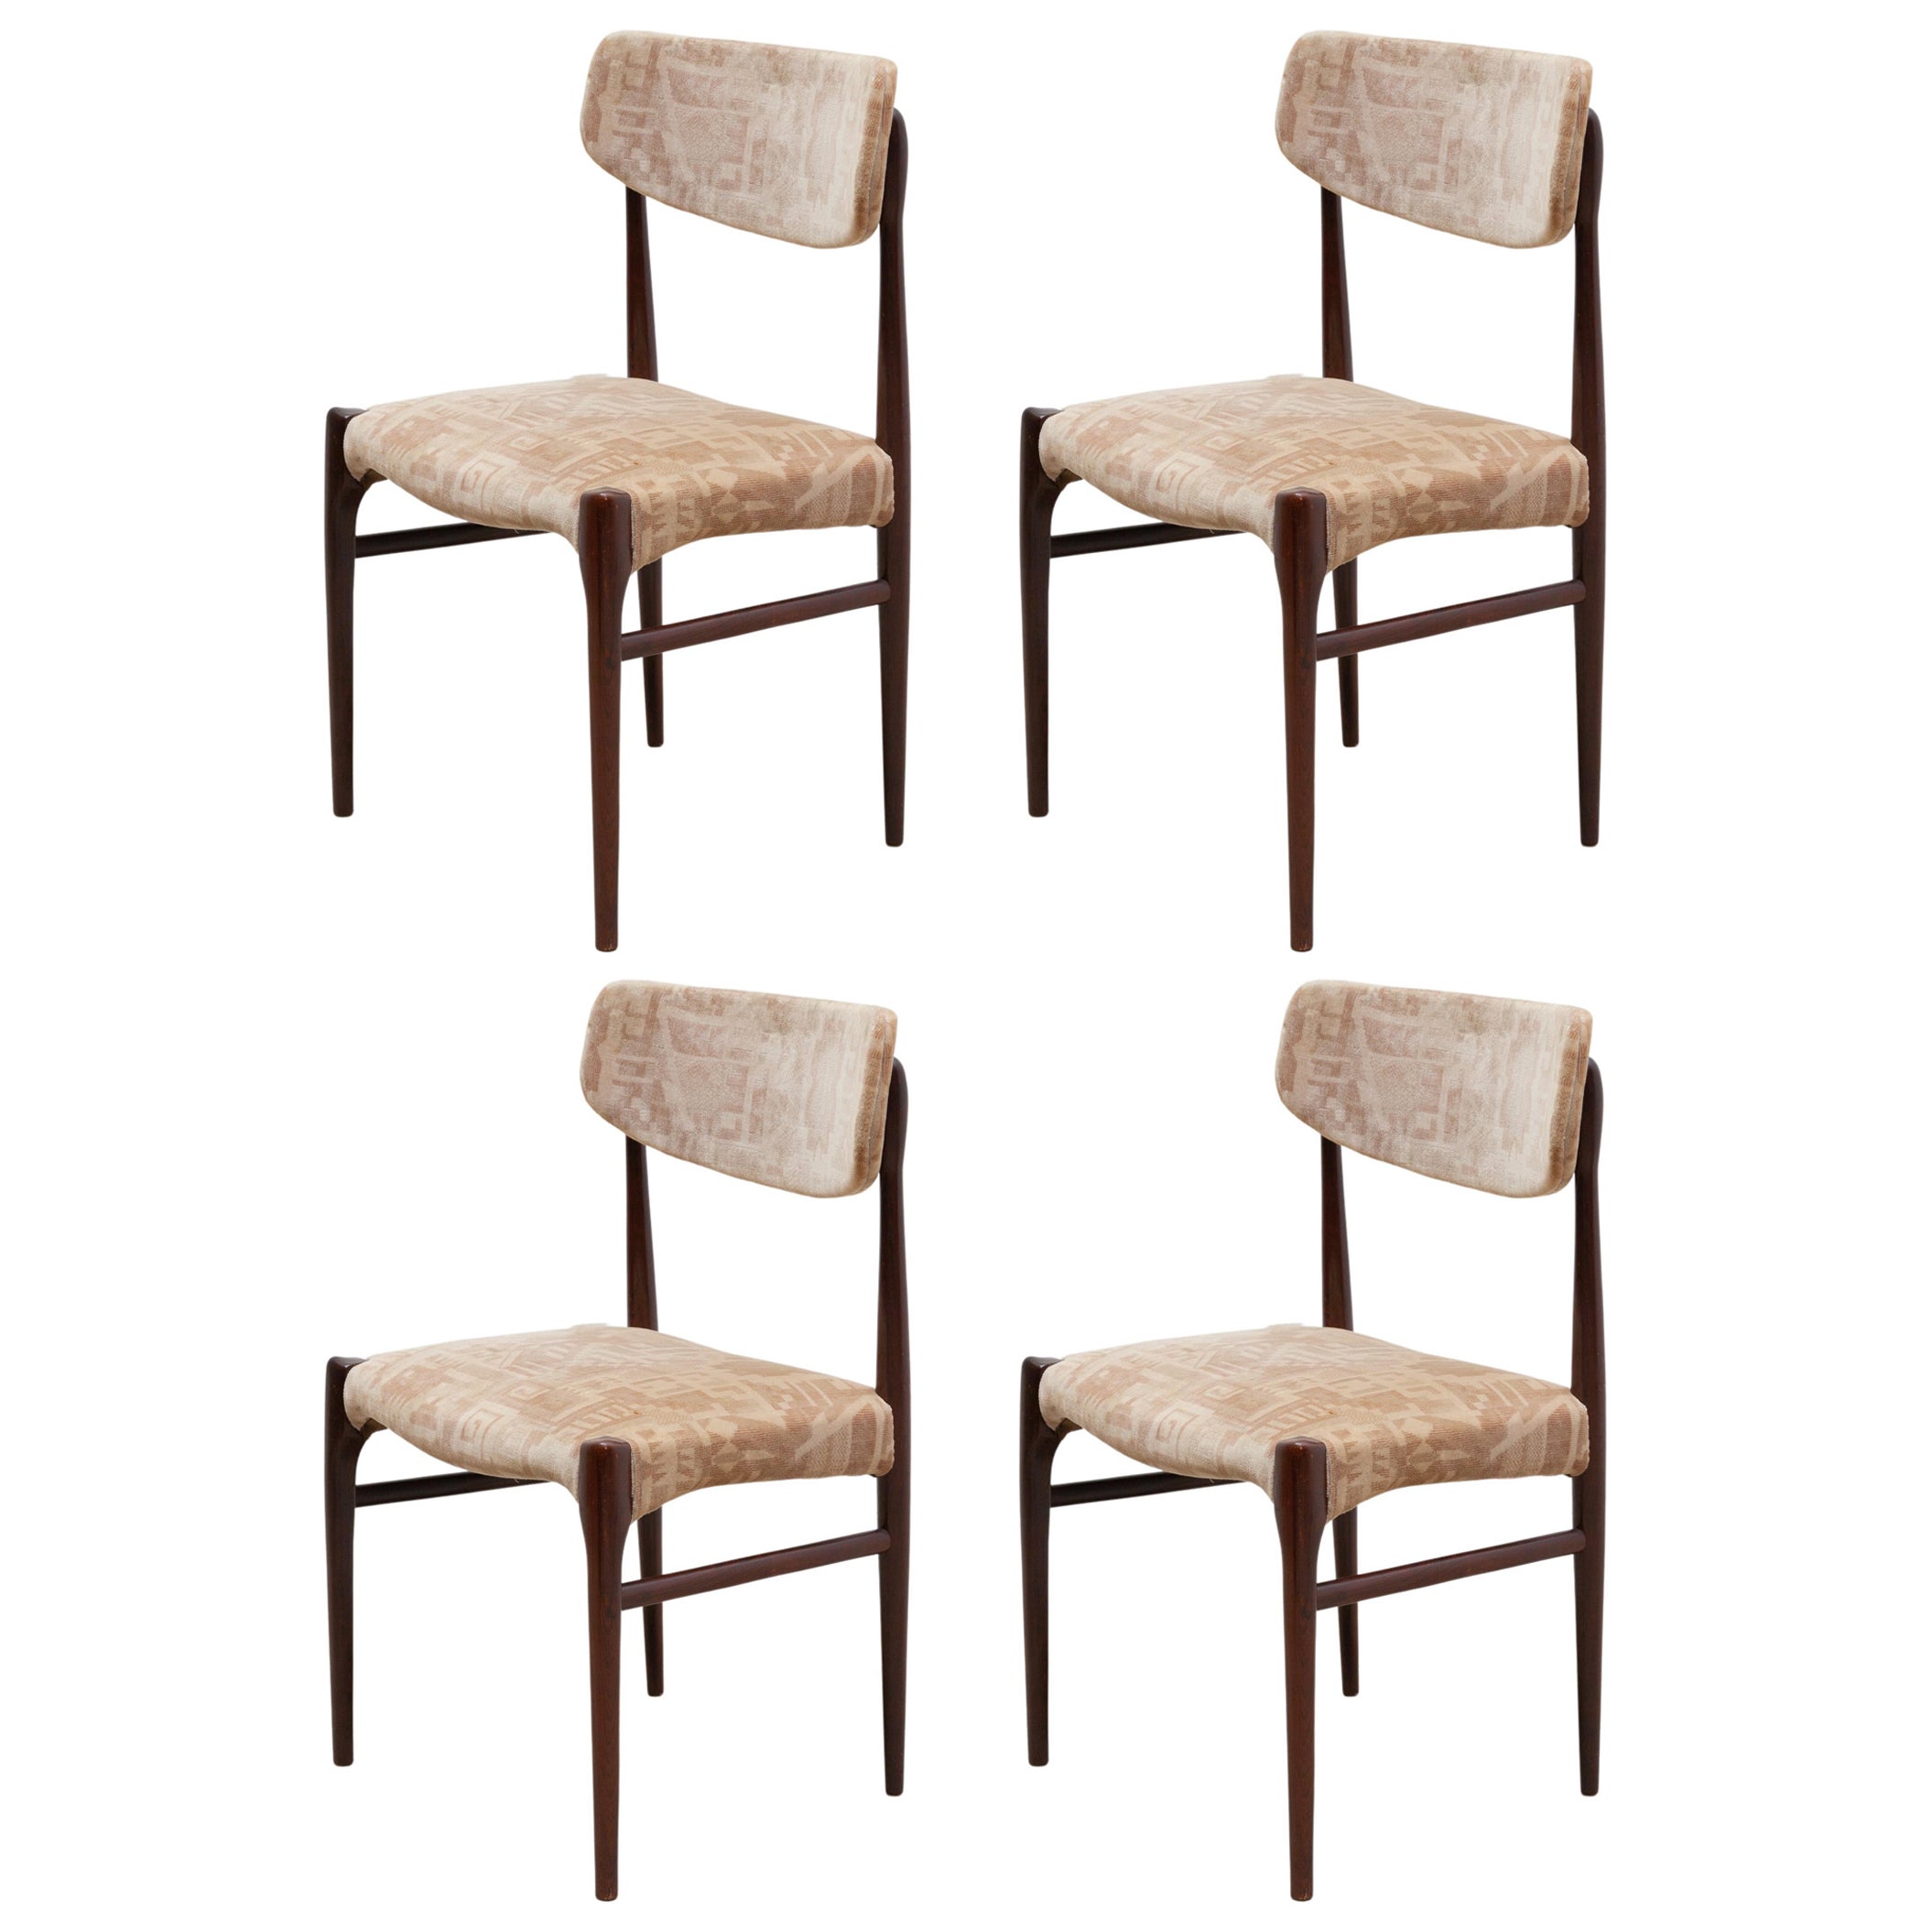 Set of Four Sculptural Dining Chairs, Denmark, 1950s